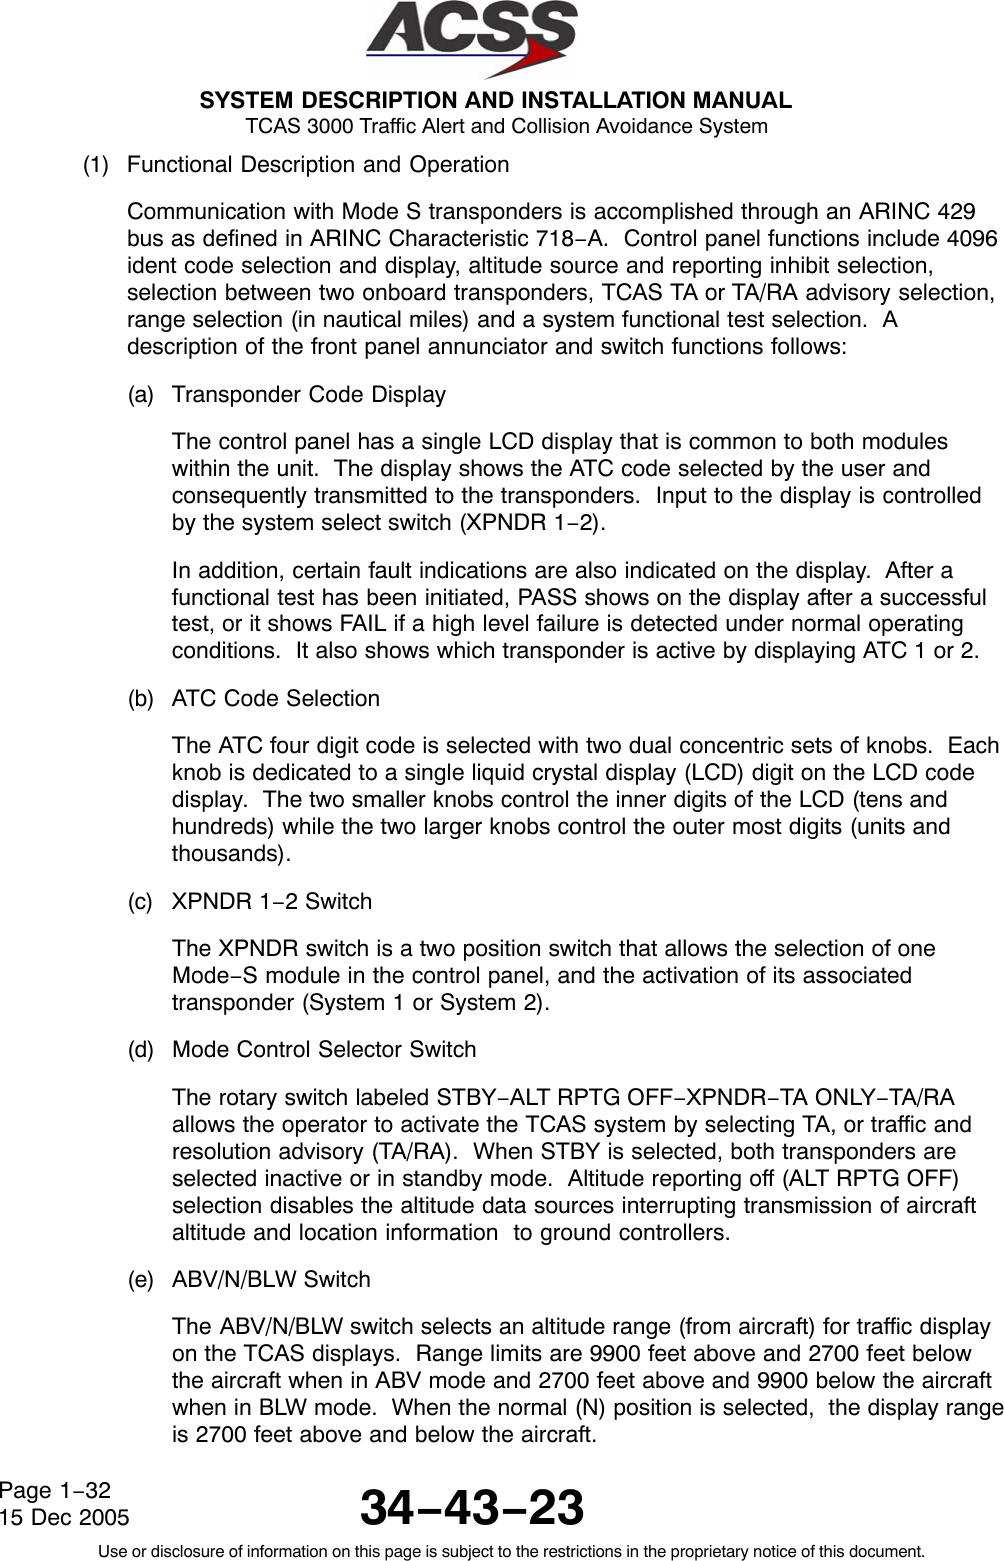  SYSTEM DESCRIPTION AND INSTALLATION MANUAL TCAS 3000 Traffic Alert and Collision Avoidance System34−43−23Use or disclosure of information on this page is subject to the restrictions in the proprietary notice of this document.Page 1−3215 Dec 2005(1) Functional Description and OperationCommunication with Mode S transponders is accomplished through an ARINC 429bus as defined in ARINC Characteristic 718−A.  Control panel functions include 4096ident code selection and display, altitude source and reporting inhibit selection,selection between two onboard transponders, TCAS TA or TA/RA advisory selection,range selection (in nautical miles) and a system functional test selection.  Adescription of the front panel annunciator and switch functions follows:(a) Transponder Code DisplayThe control panel has a single LCD display that is common to both moduleswithin the unit.  The display shows the ATC code selected by the user andconsequently transmitted to the transponders.  Input to the display is controlledby the system select switch (XPNDR 1−2).In addition, certain fault indications are also indicated on the display.  After afunctional test has been initiated, PASS shows on the display after a successfultest, or it shows FAIL if a high level failure is detected under normal operatingconditions.  It also shows which transponder is active by displaying ATC 1 or 2.(b) ATC Code SelectionThe ATC four digit code is selected with two dual concentric sets of knobs.  Eachknob is dedicated to a single liquid crystal display (LCD) digit on the LCD codedisplay.  The two smaller knobs control the inner digits of the LCD (tens andhundreds) while the two larger knobs control the outer most digits (units andthousands).(c) XPNDR 1−2 SwitchThe XPNDR switch is a two position switch that allows the selection of oneMode−S module in the control panel, and the activation of its associatedtransponder (System 1 or System 2).(d) Mode Control Selector SwitchThe rotary switch labeled STBY−ALT RPTG OFF−XPNDR−TA ONLY−TA/RAallows the operator to activate the TCAS system by selecting TA, or traffic andresolution advisory (TA/RA).  When STBY is selected, both transponders areselected inactive or in standby mode.  Altitude reporting off (ALT RPTG OFF)selection disables the altitude data sources interrupting transmission of aircraftaltitude and location information  to ground controllers.(e) ABV/N/BLW SwitchThe ABV/N/BLW switch selects an altitude range (from aircraft) for traffic displayon the TCAS displays.  Range limits are 9900 feet above and 2700 feet belowthe aircraft when in ABV mode and 2700 feet above and 9900 below the aircraftwhen in BLW mode.  When the normal (N) position is selected,  the display rangeis 2700 feet above and below the aircraft.